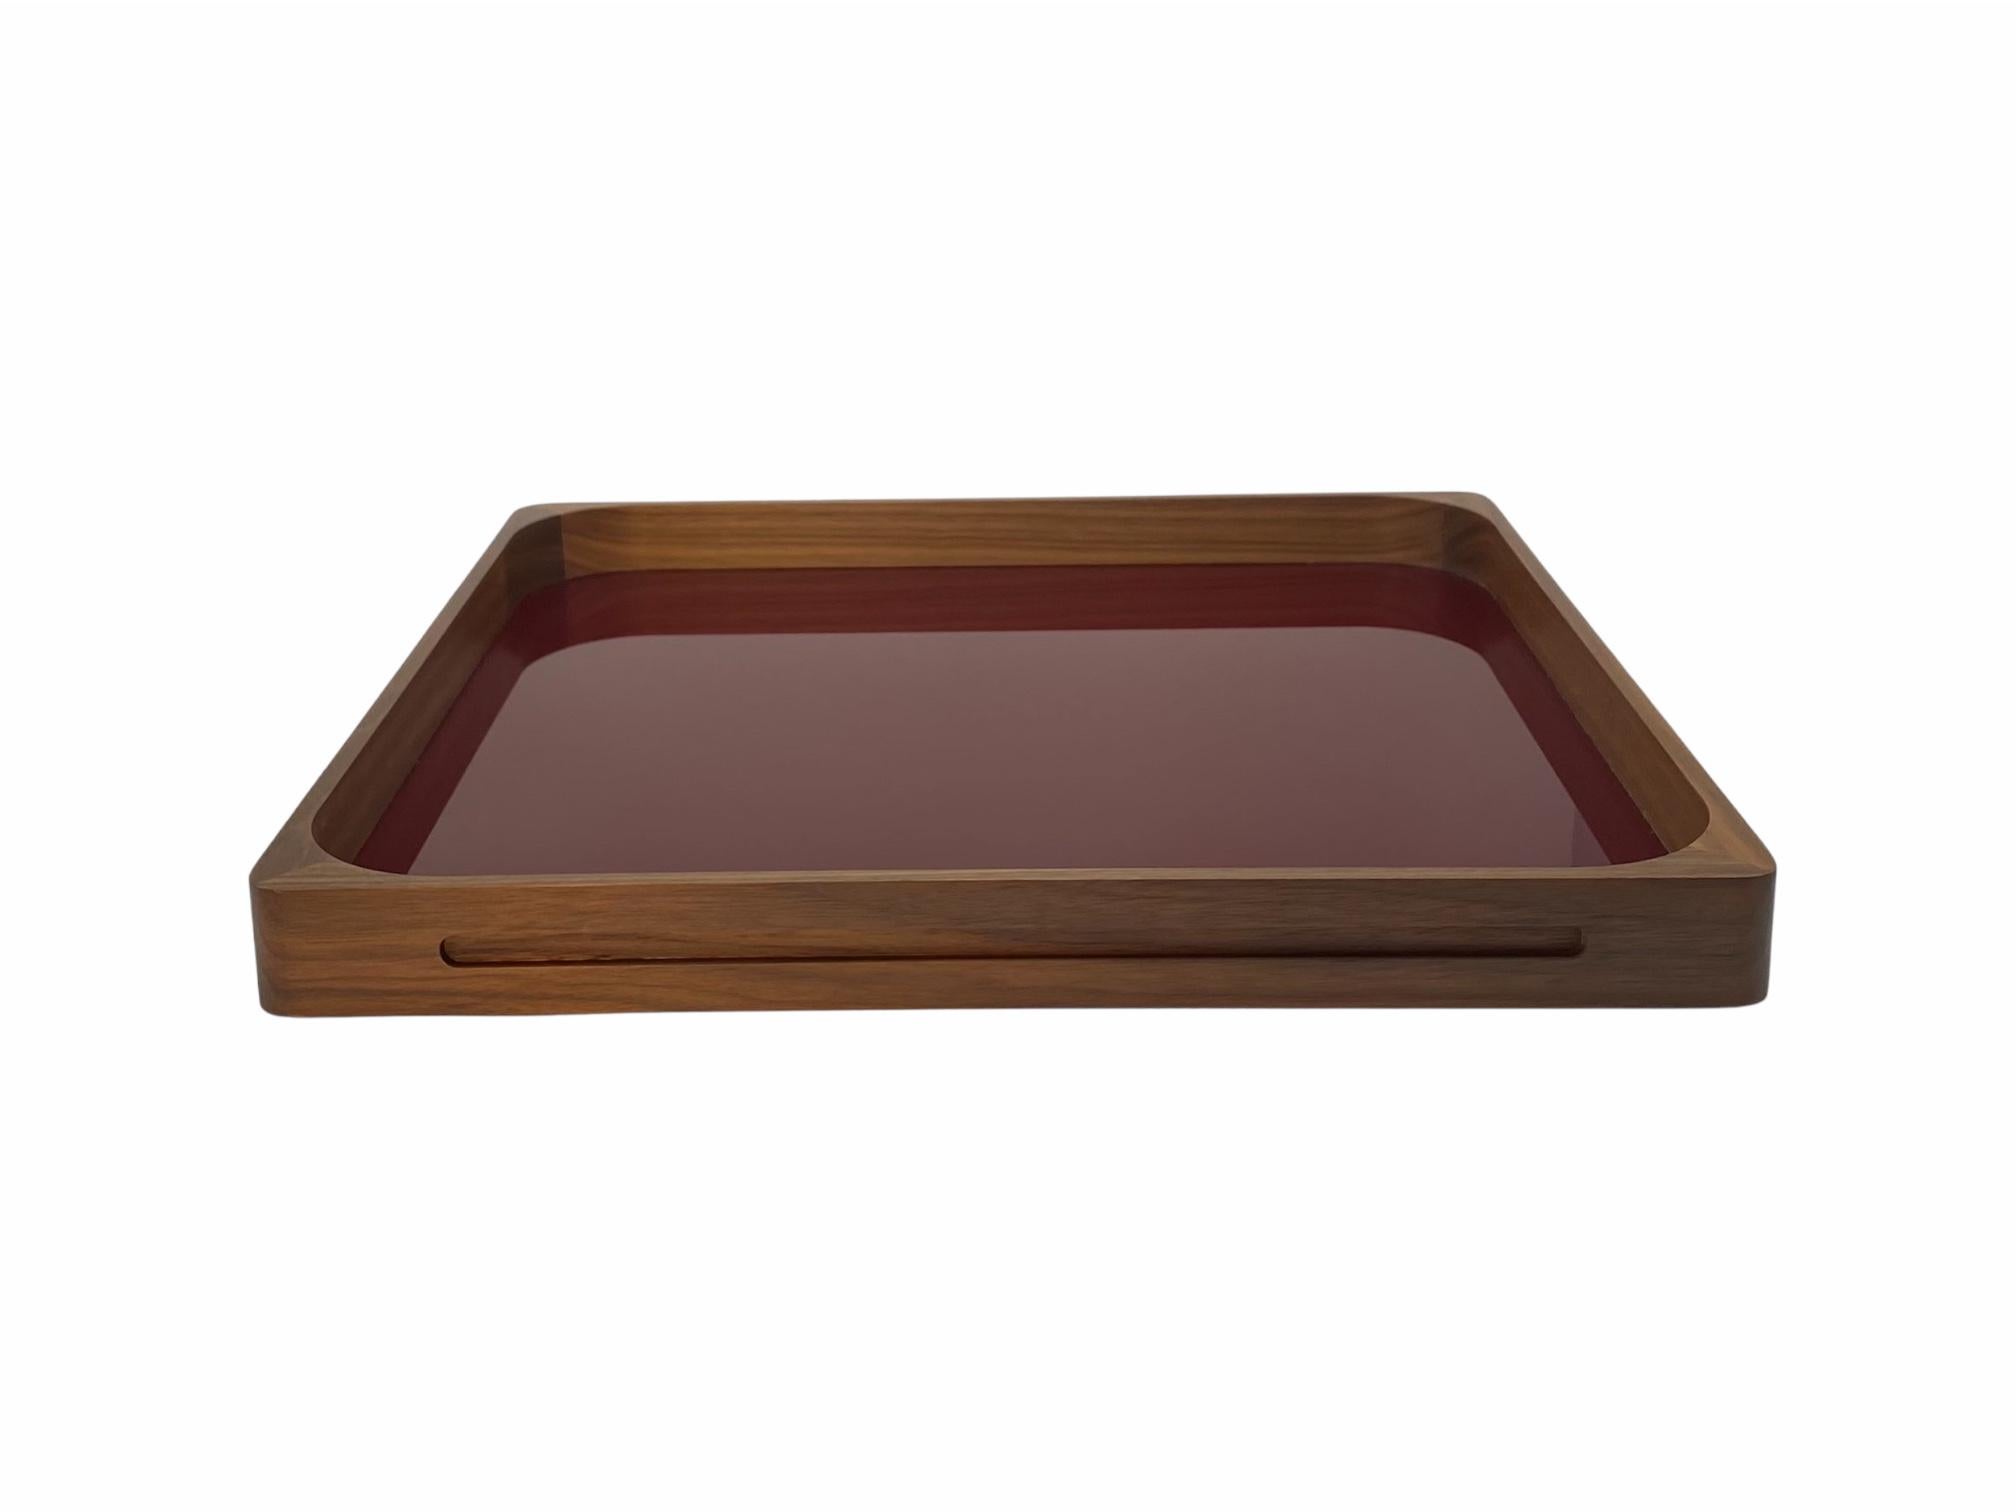 This classic, yet modern, craftsmanship based tray is made out of walnut wood and acrylic and was designed by GS in 2004. It can be used by clients as a cocktail tray as well as a very modern and practical serving tray, making it the perfect gift.